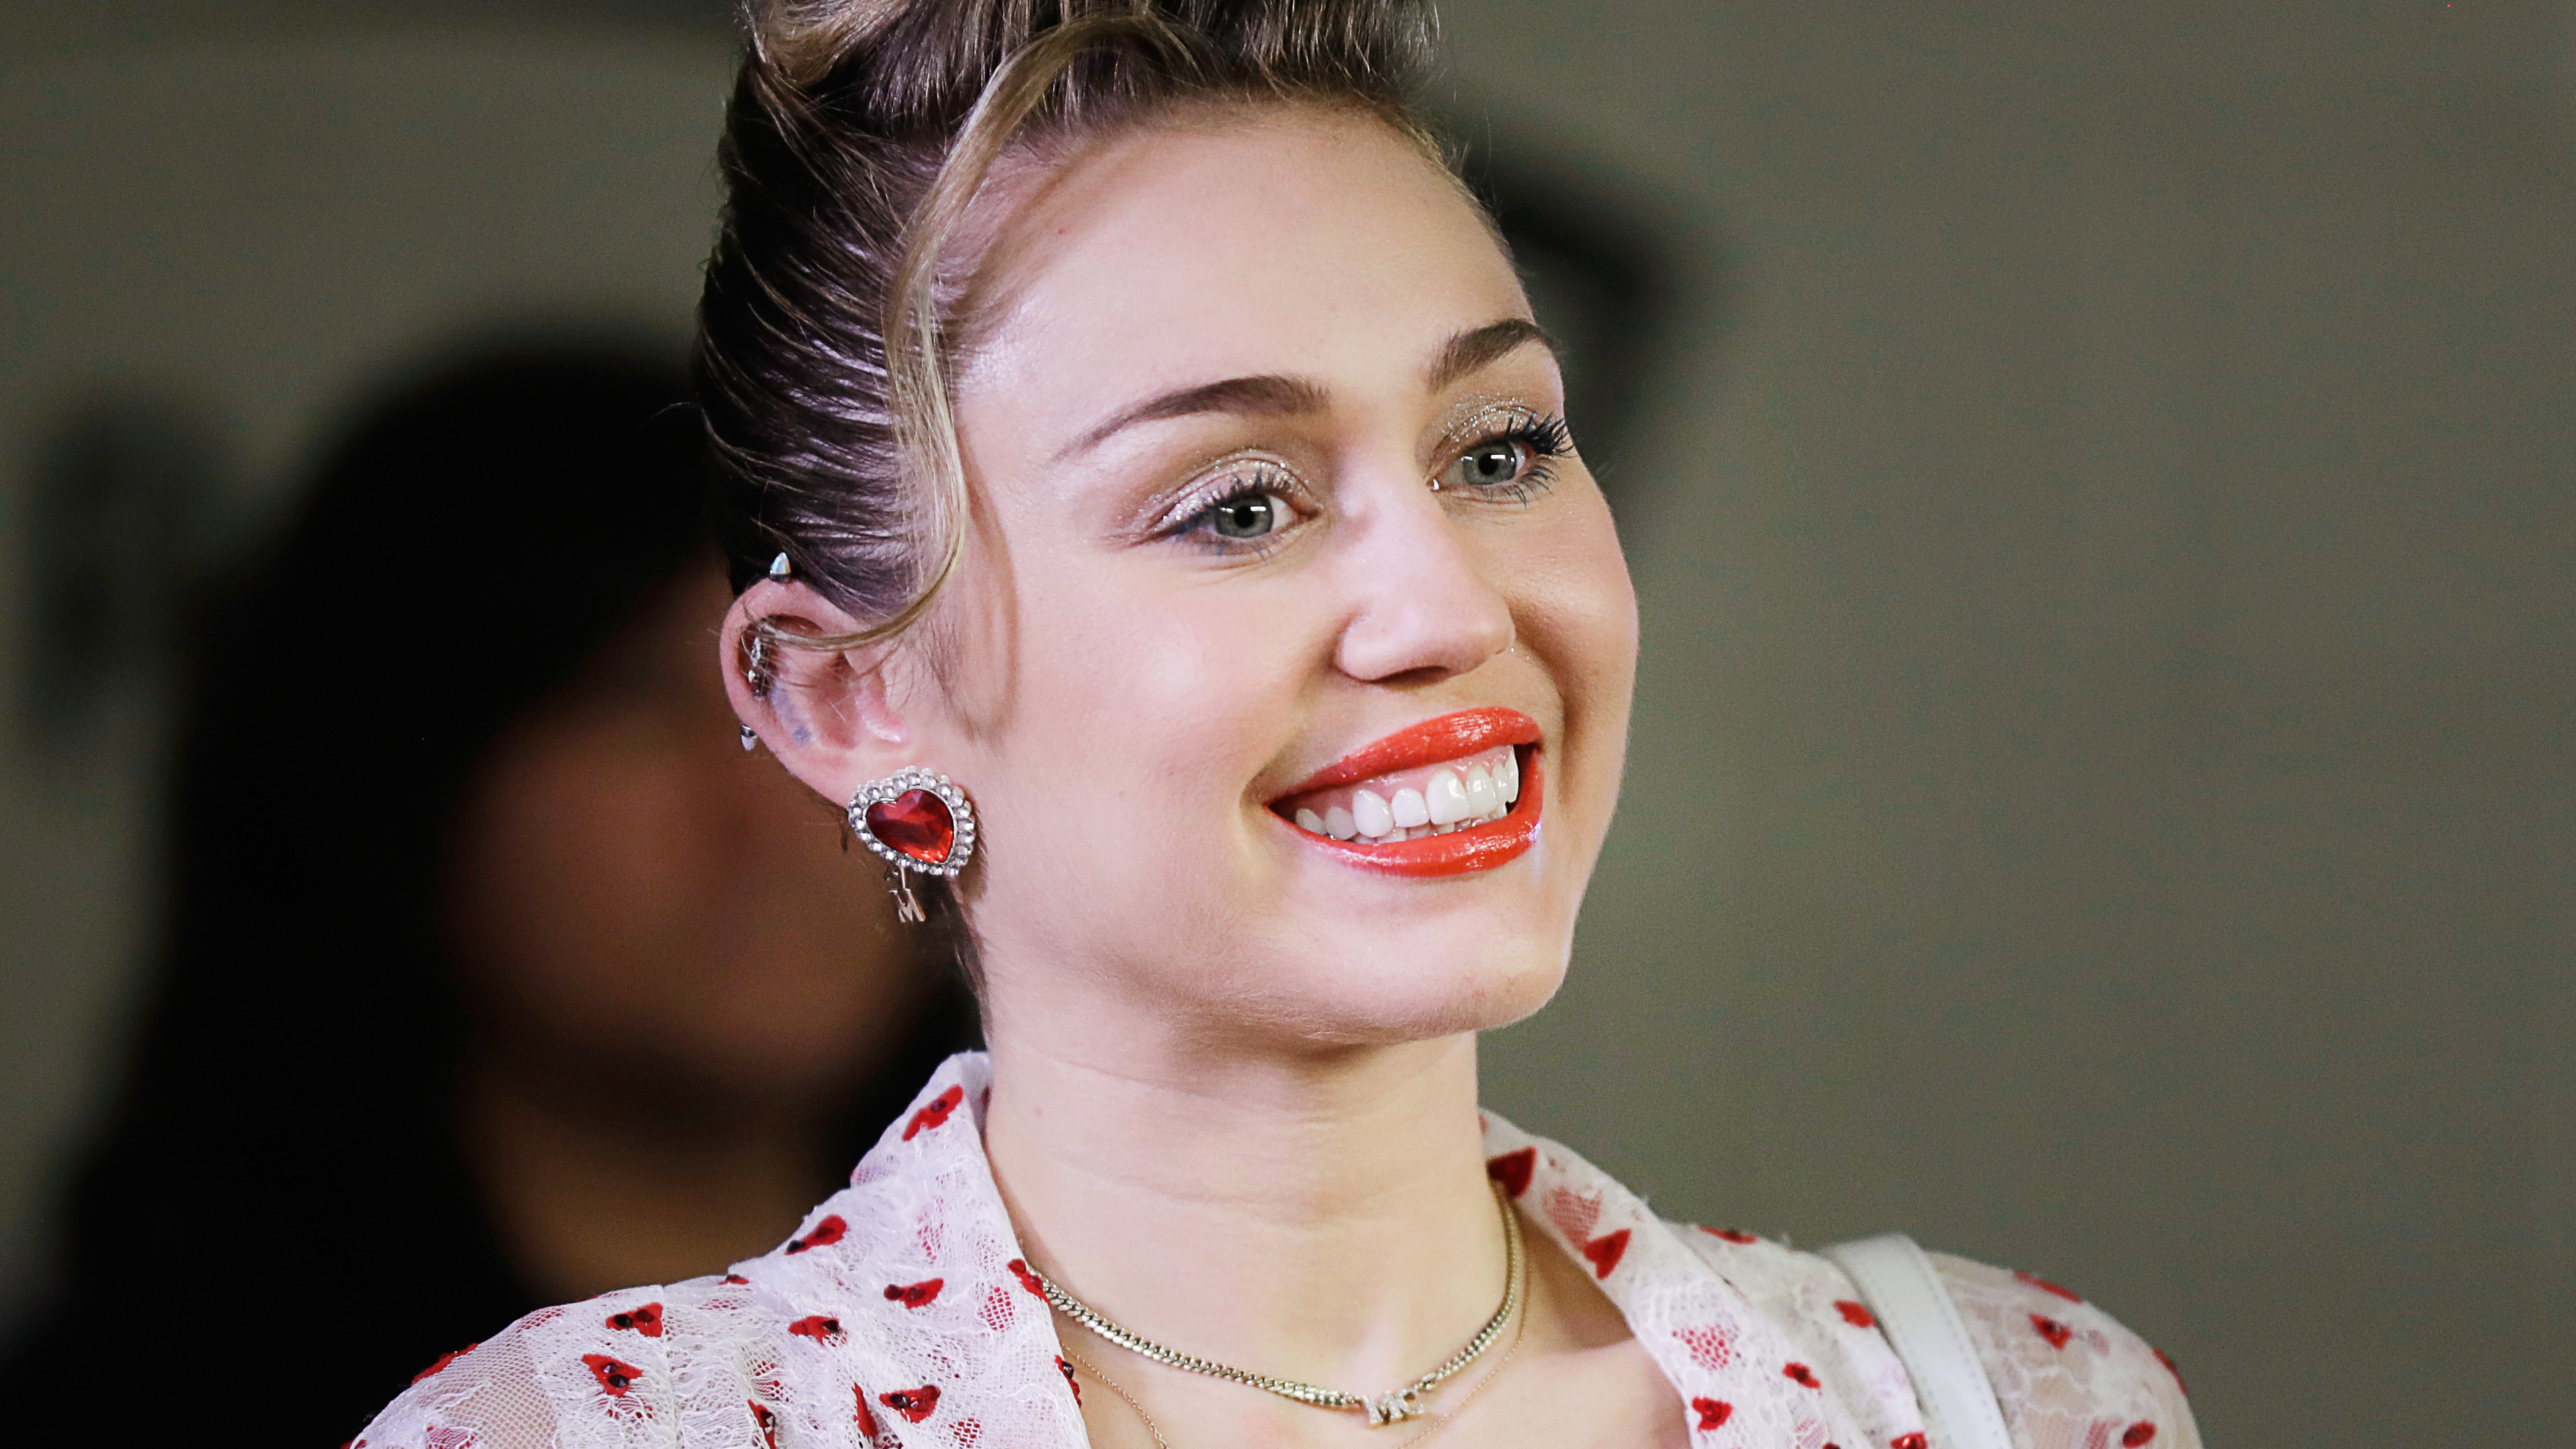 Miley Cyrus 2018 Wallpapers